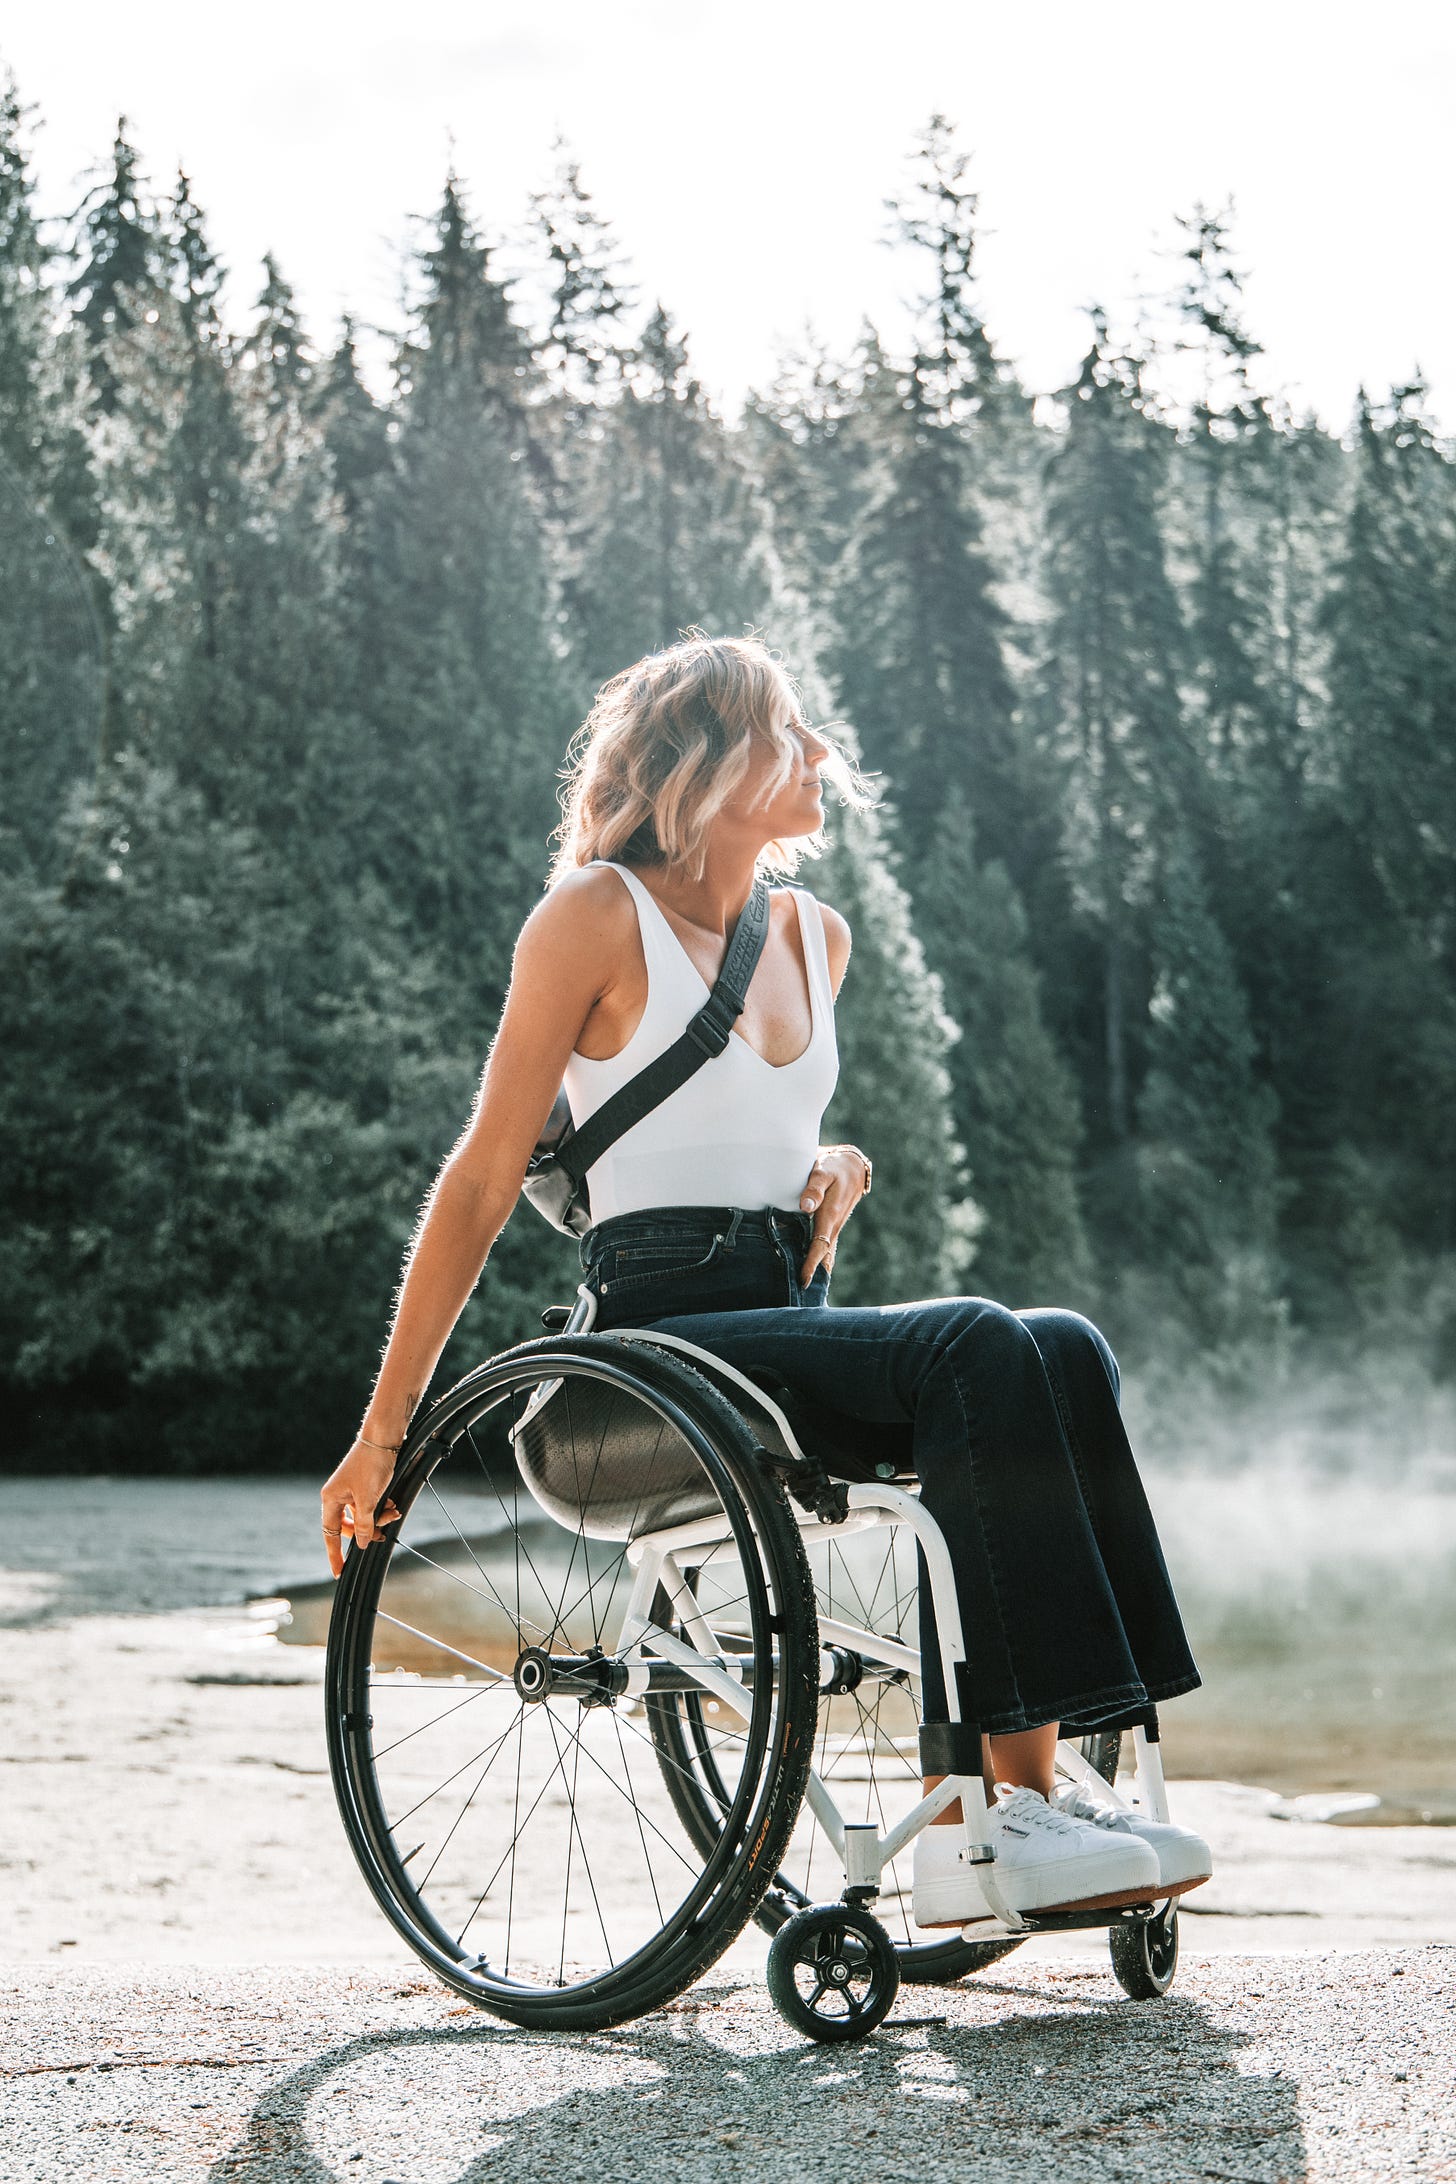 A white woman with long blonde hair sits in a wheelchair, against a backdrop of high top trees with snow around her